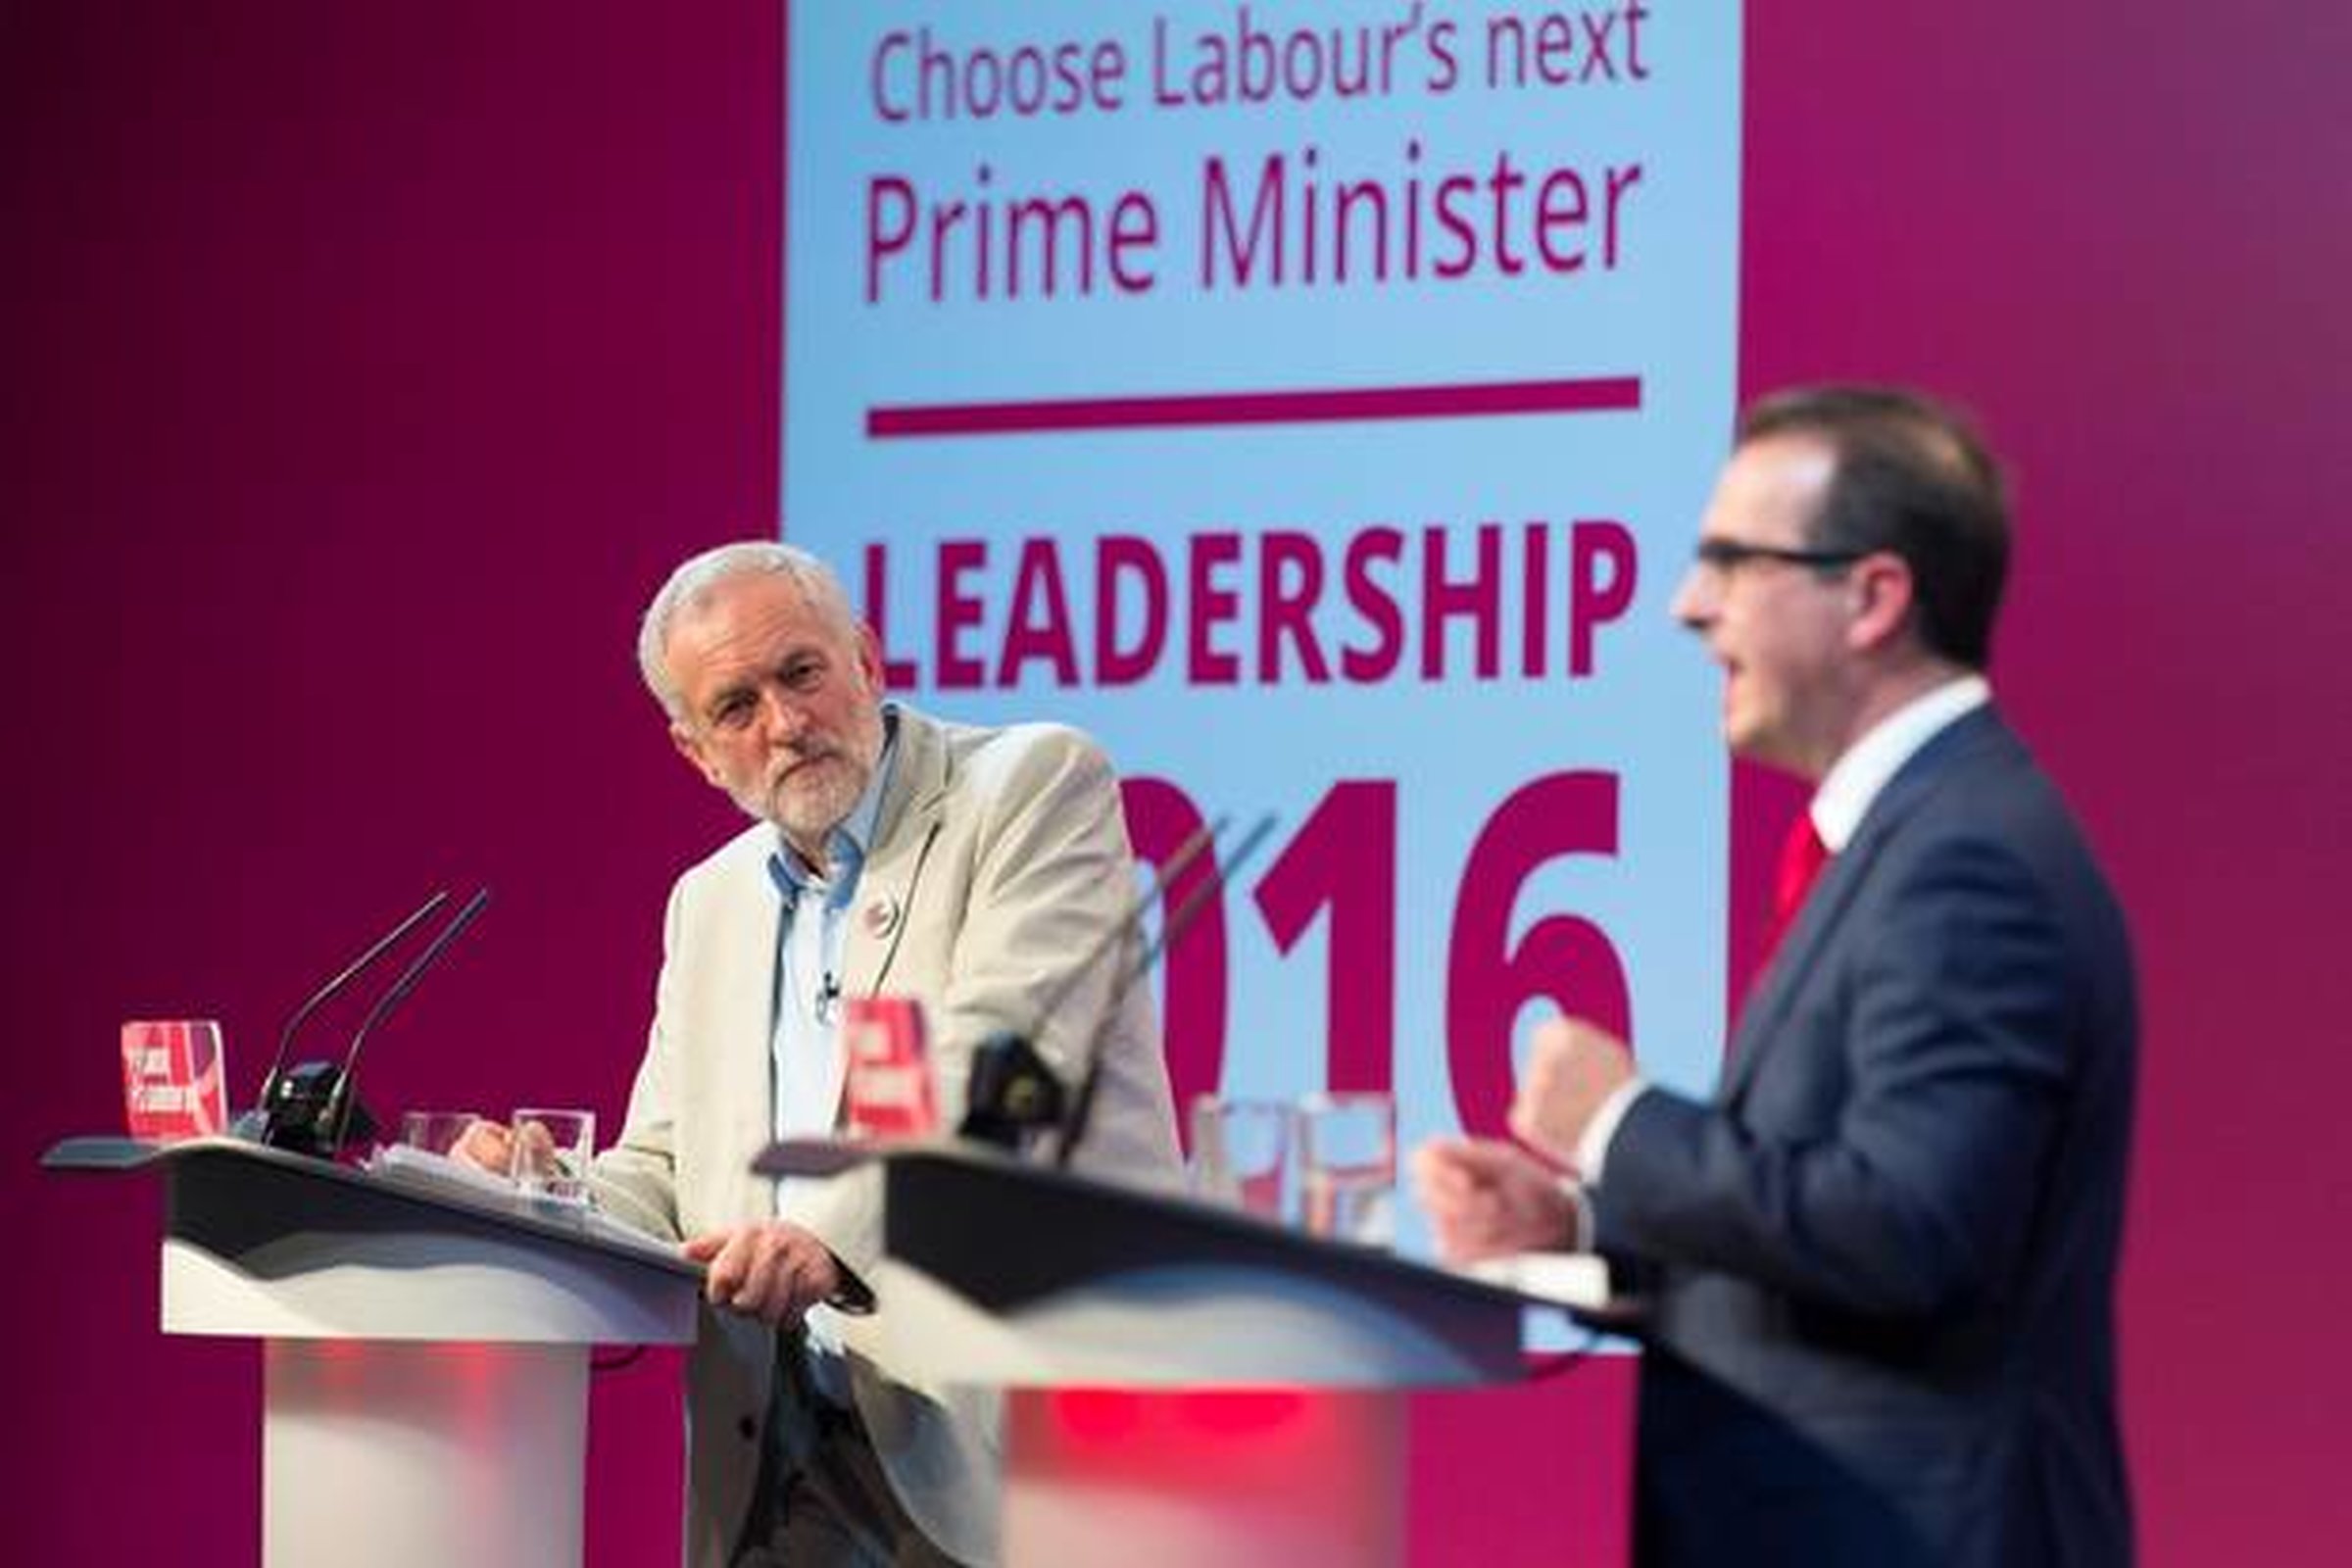 Labour must reach out to communities of faith